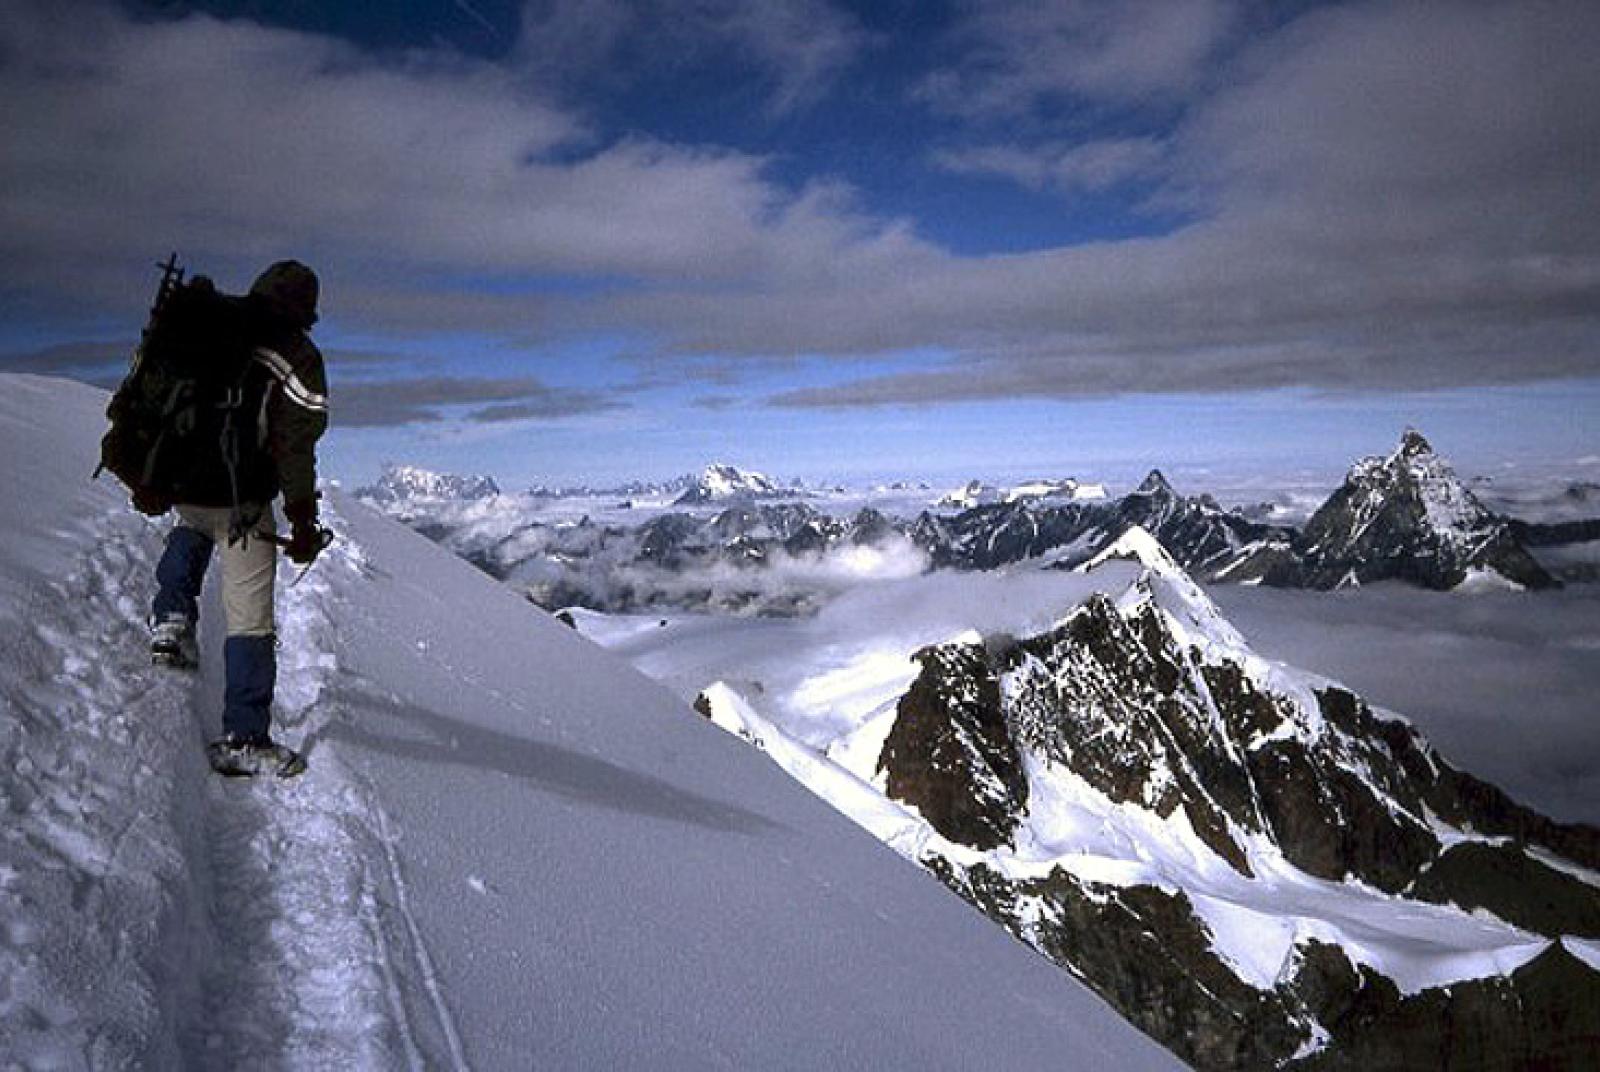 MOUNTAINEERING WITH ALPINE GUIDES